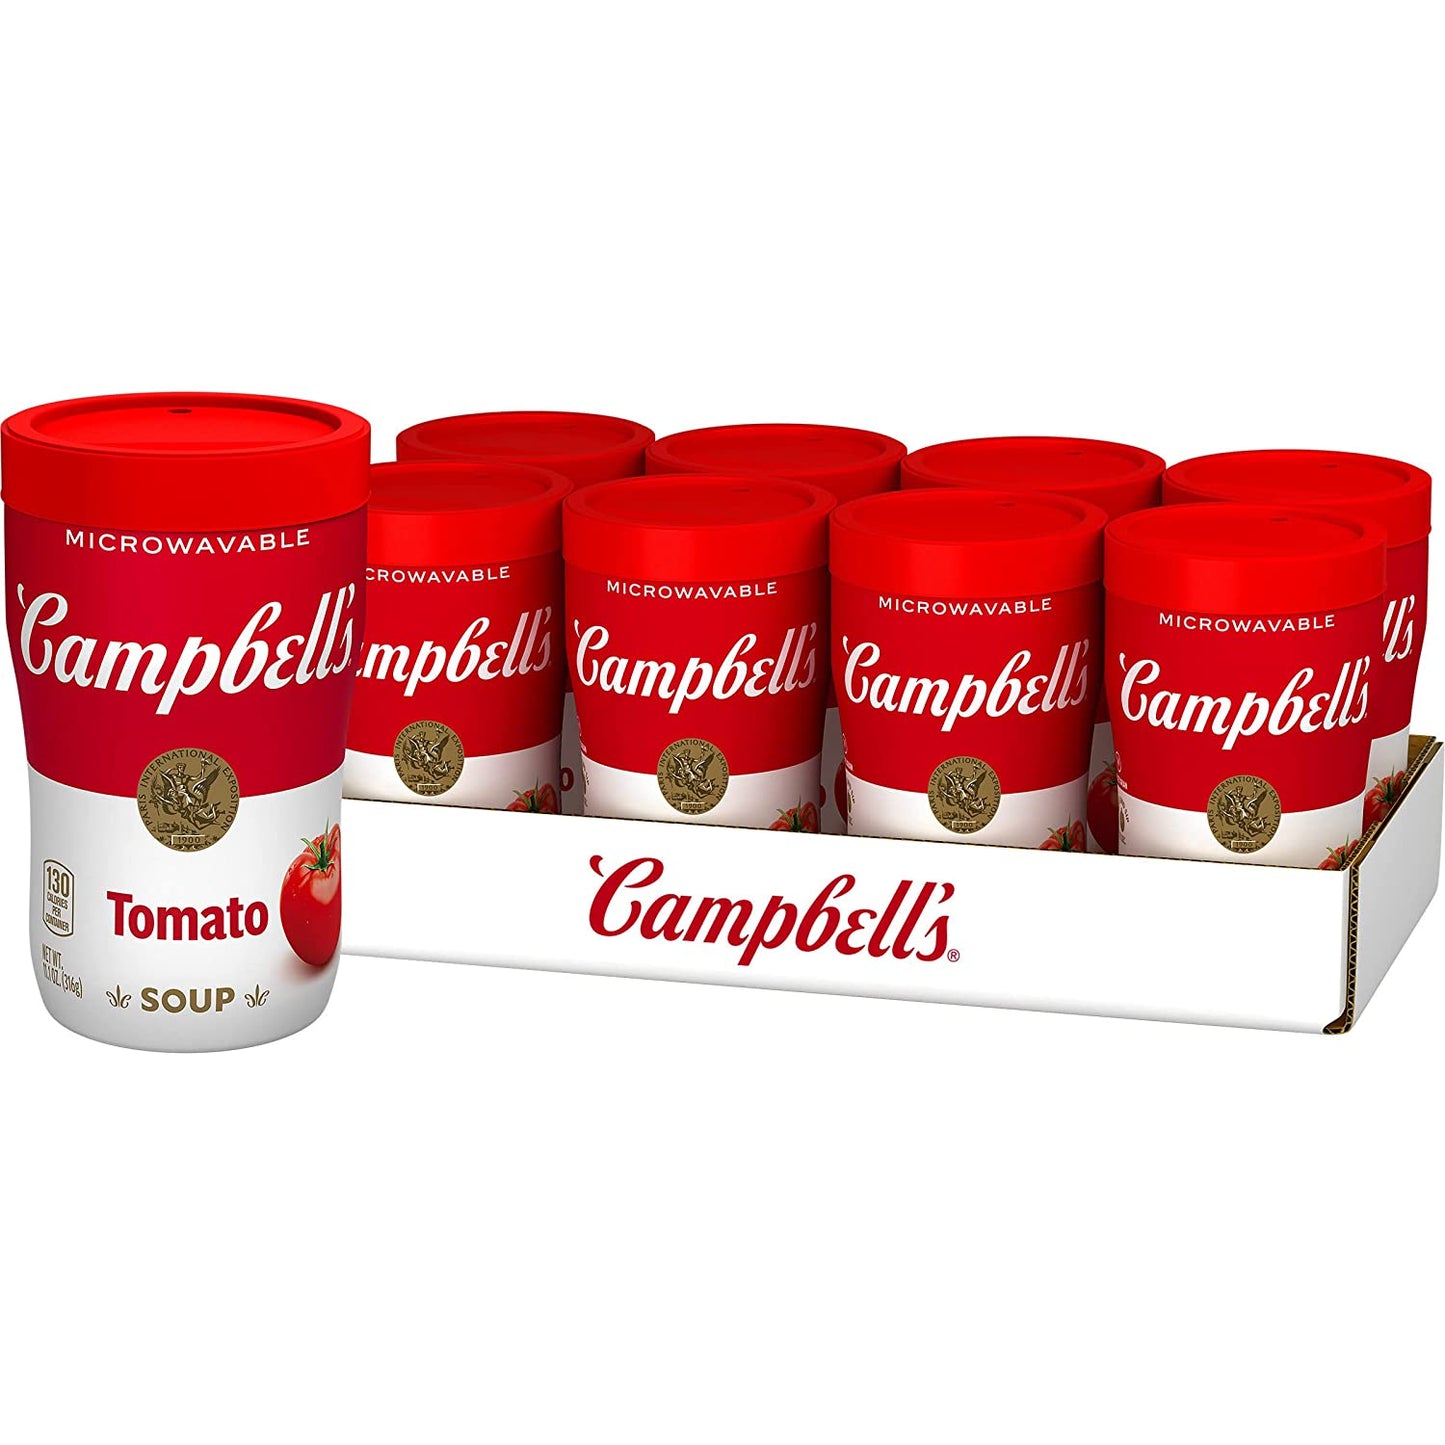 Campbell's Sipping Soup, Classic Tomato Soup, 11.1 Oz Microwavable Cup (Case of 8)